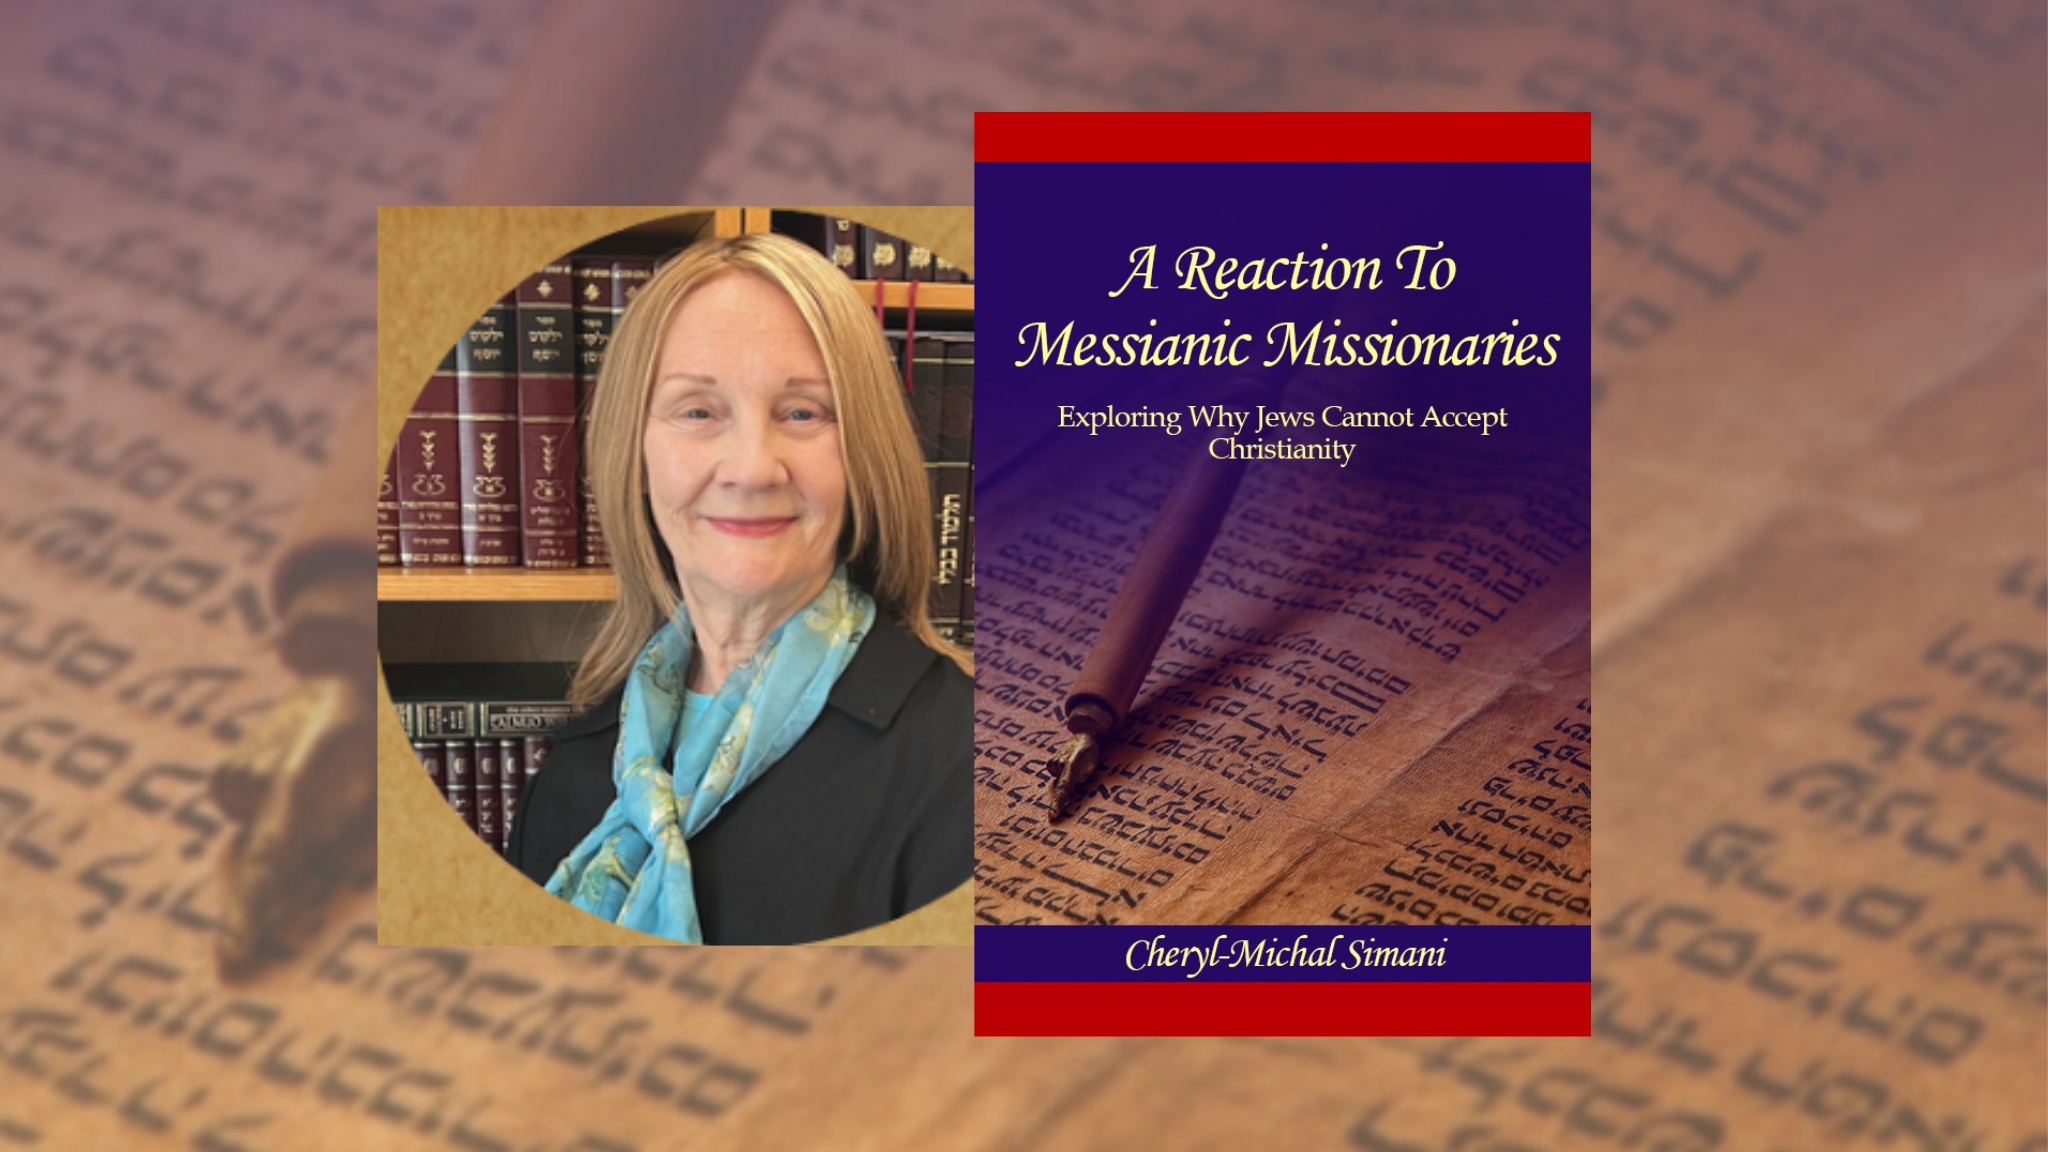 A Reaction to Messianic Missionaries by Cheryl-Michal Simani | BookTrib